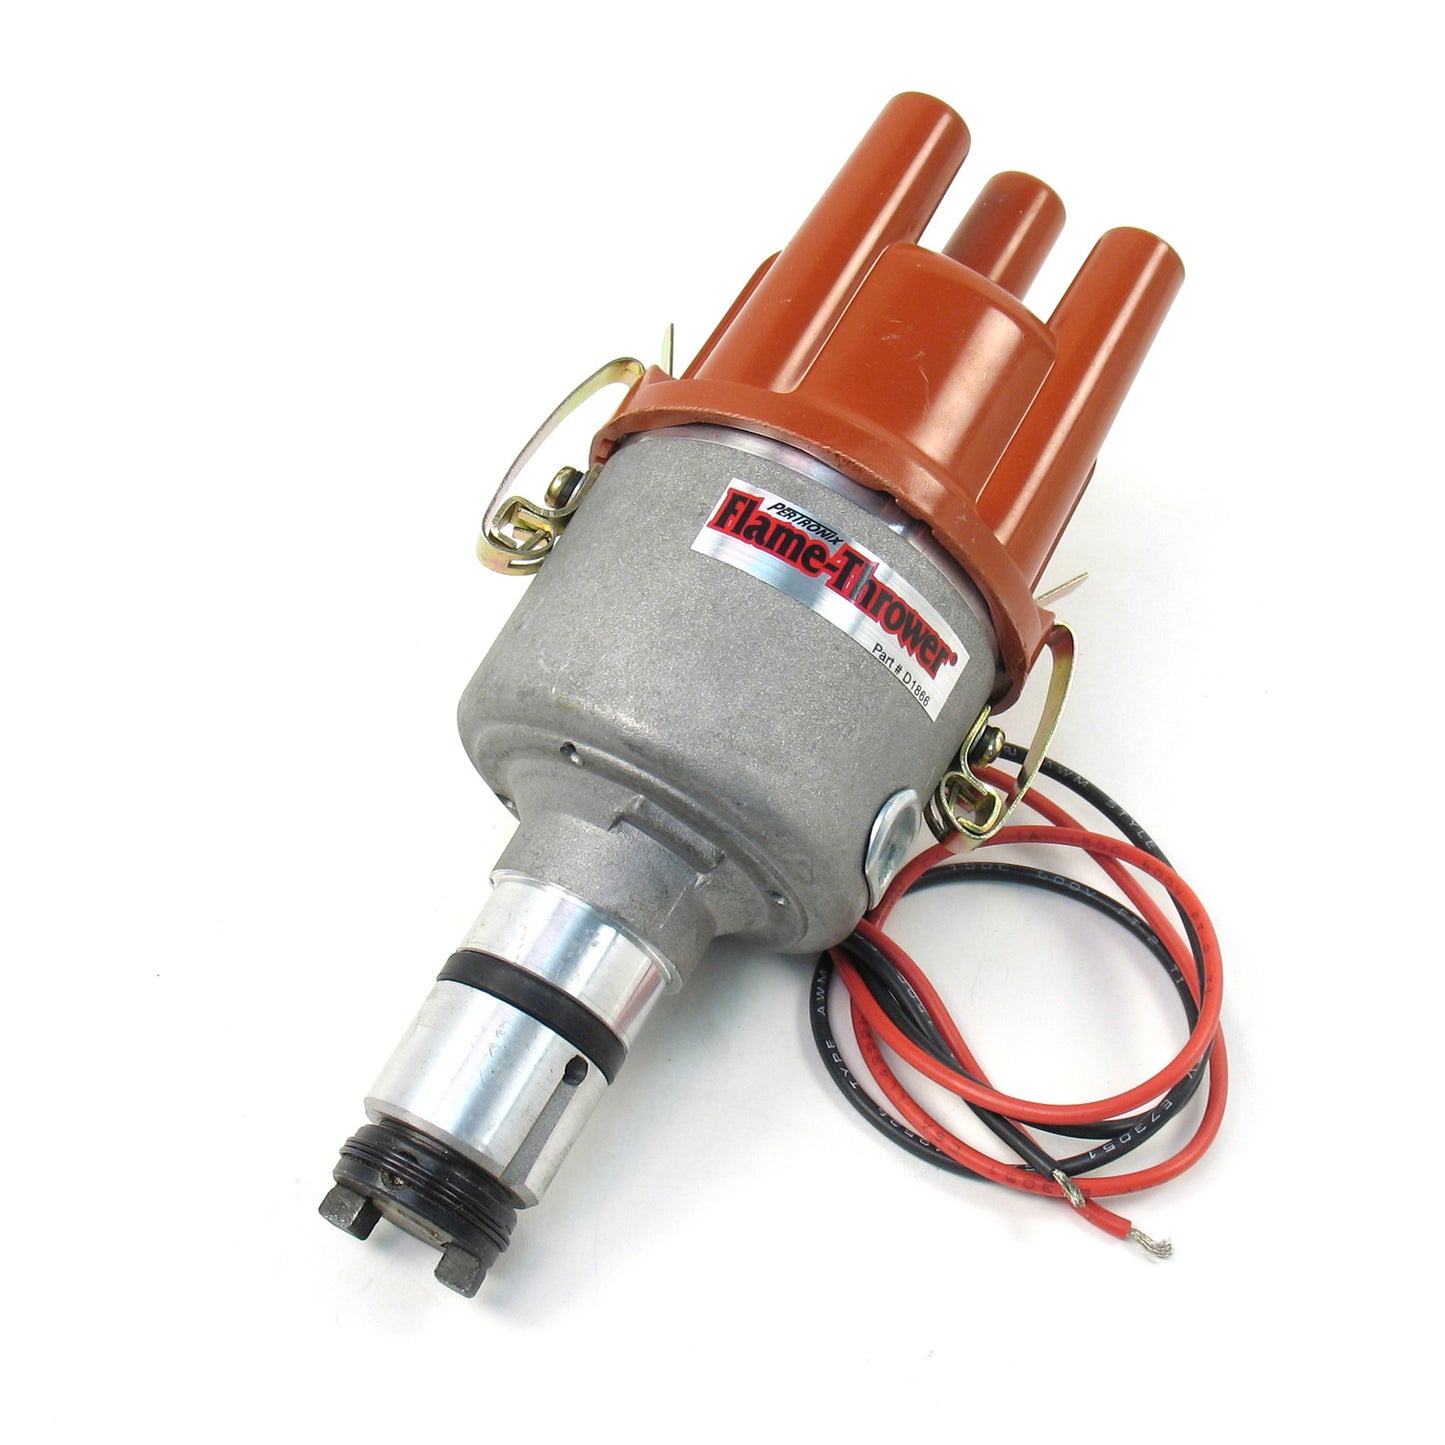 PerTronix D182604 Flame-Thrower Electronic Distributor Cast VW Type 1 Engine Plug and Play with Ignitor II Non Vacuum